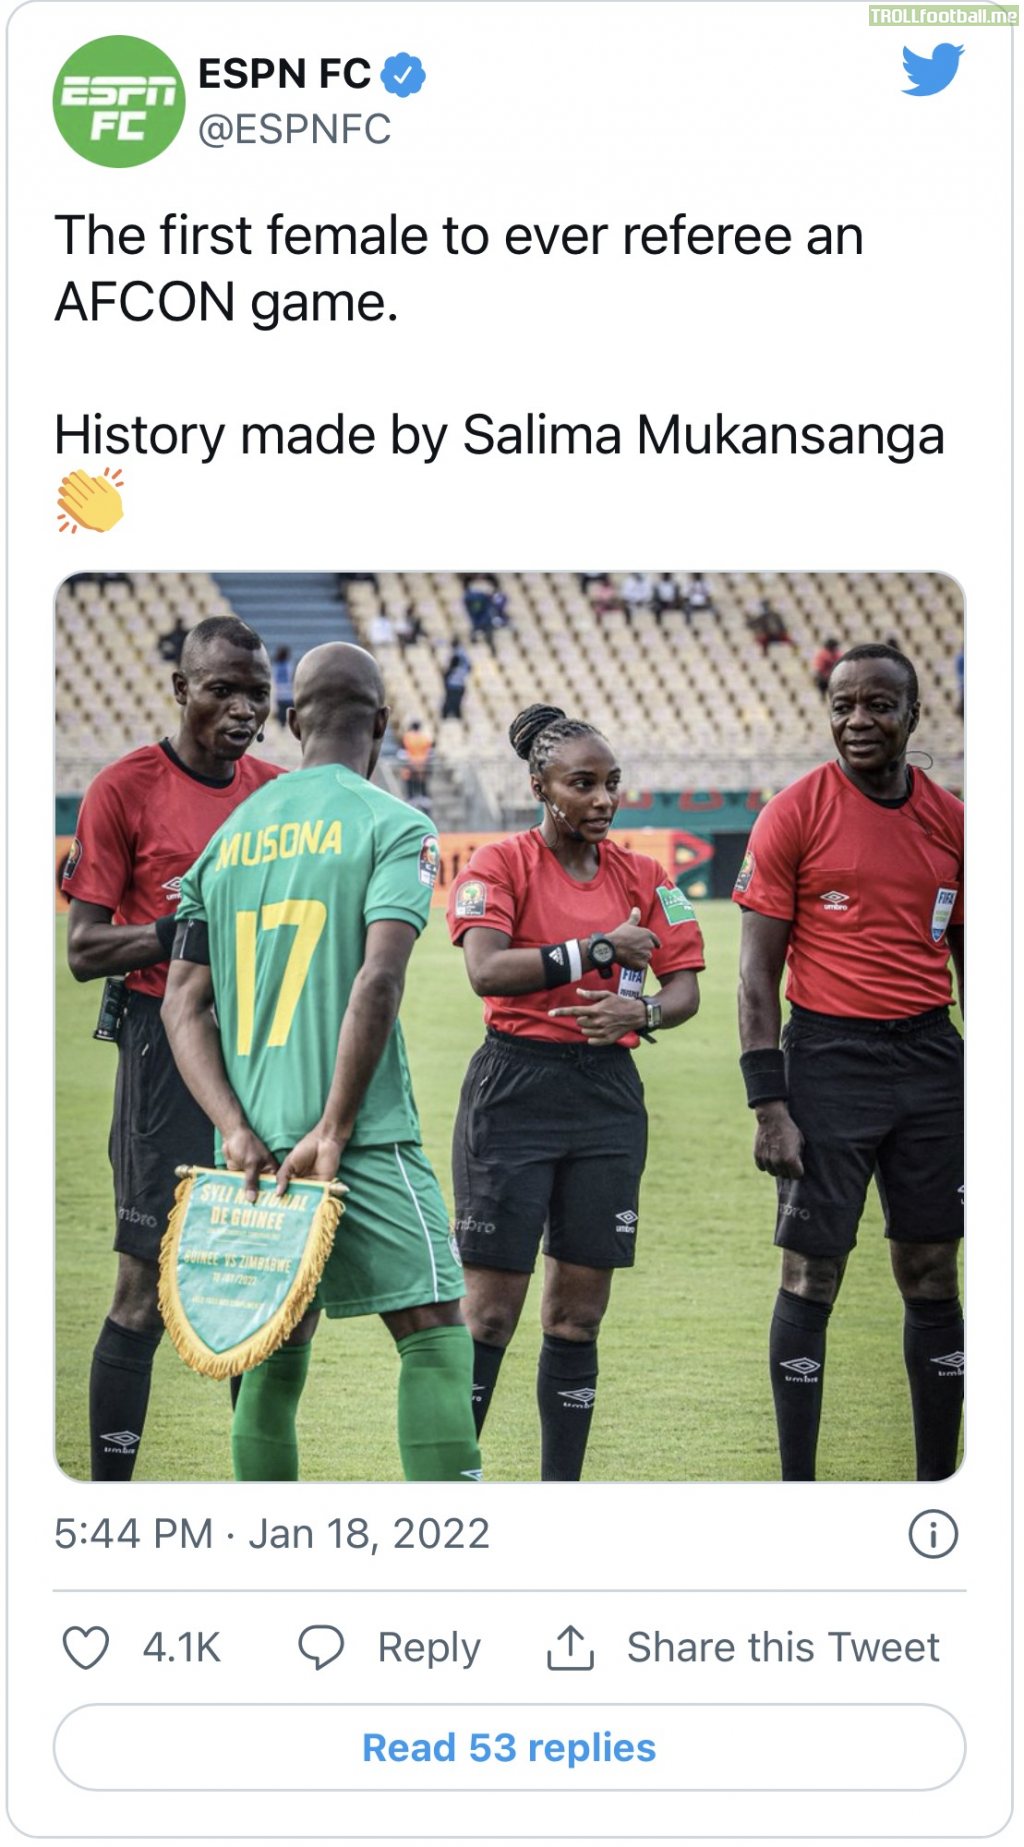 The first female to ever referee an AFCON game.